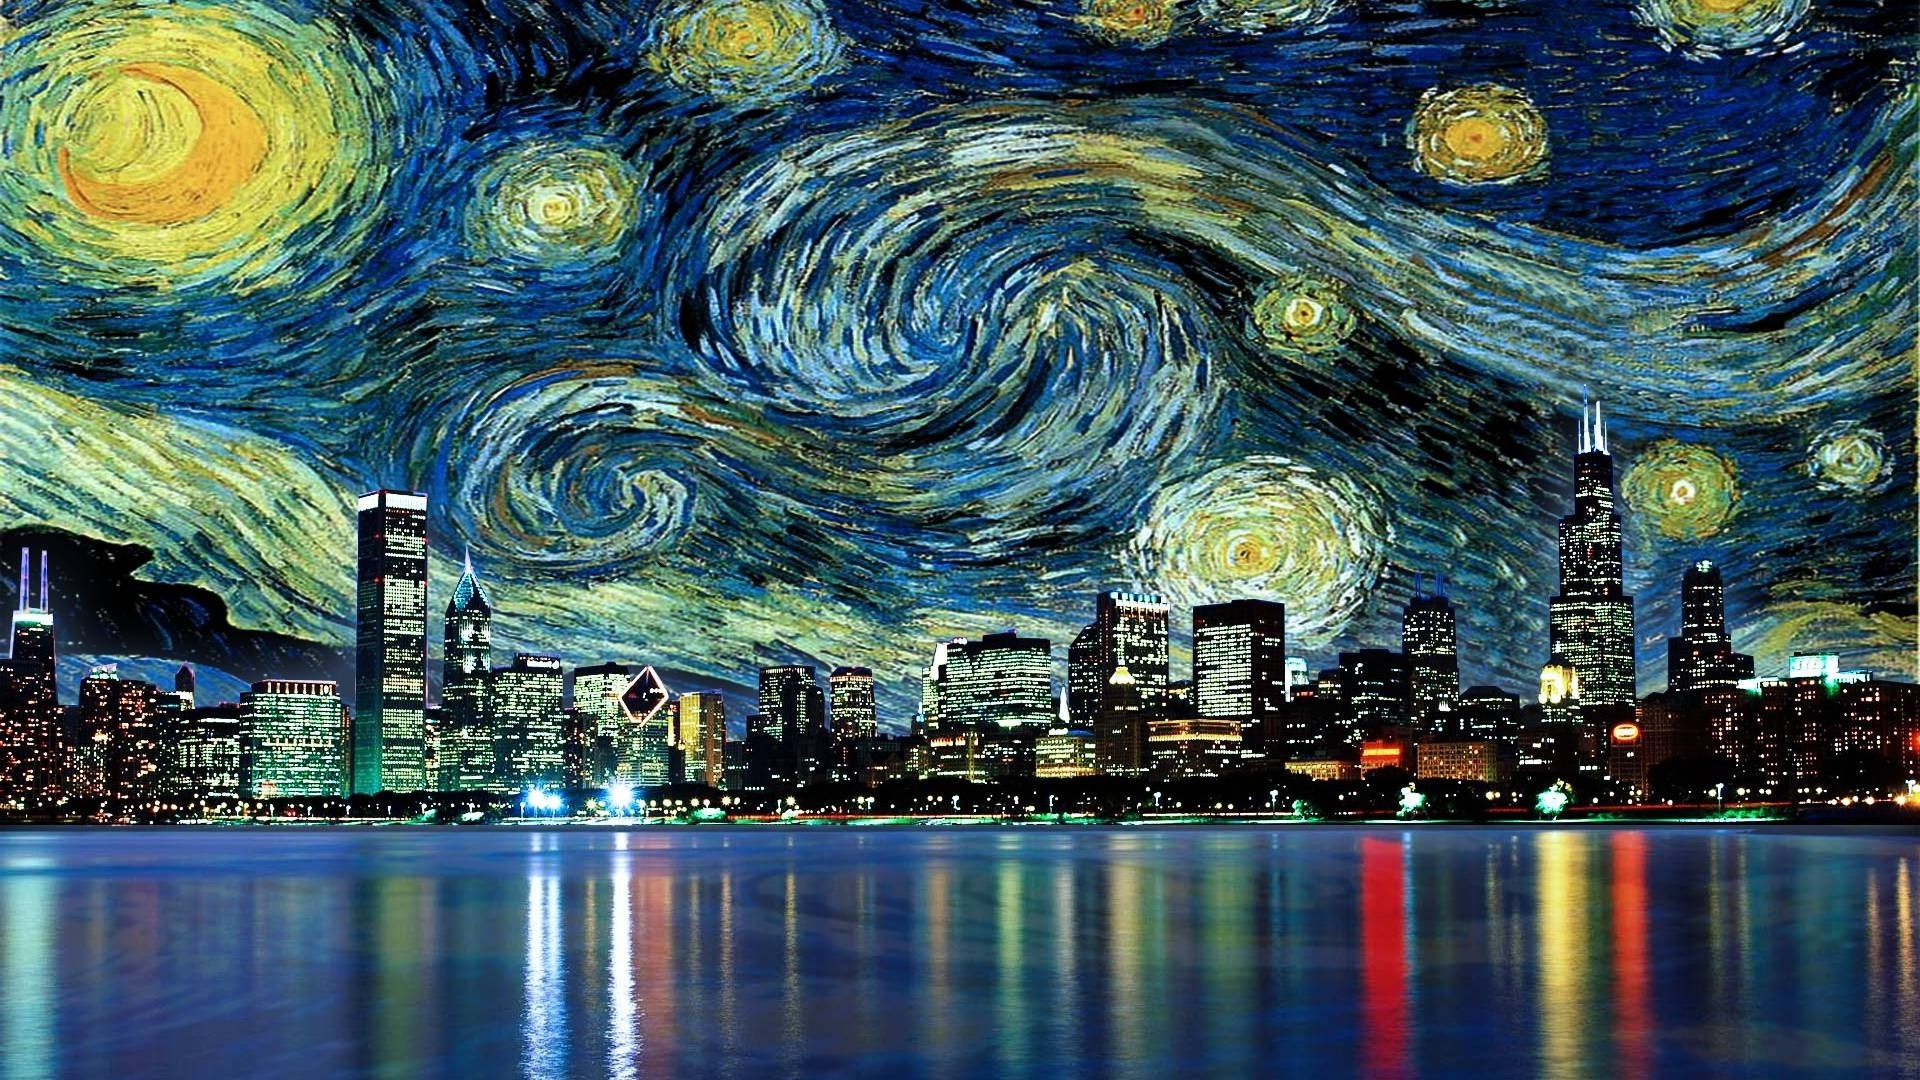 cityscape, Skyscraper, Reflection, Painting, Vincent Van Gogh, Movies, Water, Chicago, The Starry Night Wallpaper